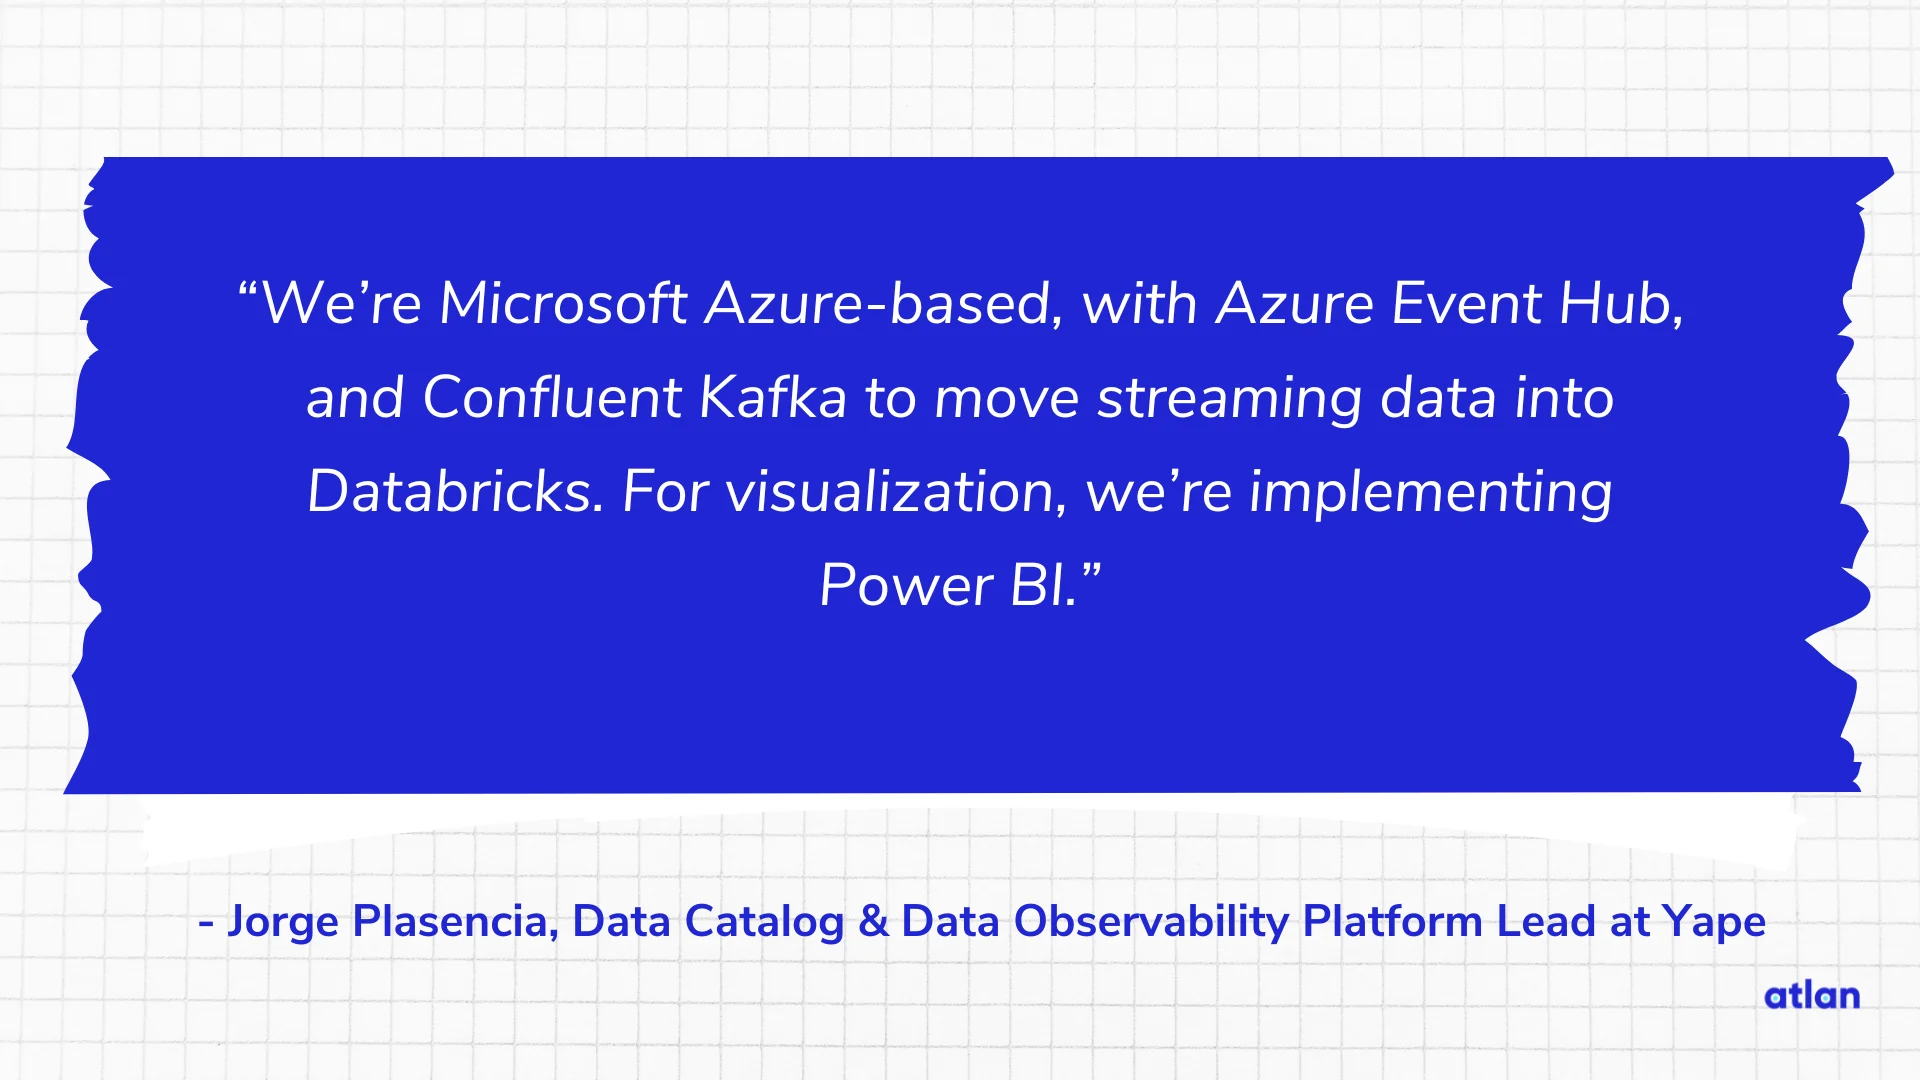 with Azure Event Hub, and Confluent Kafka to move streaming data into Databricks